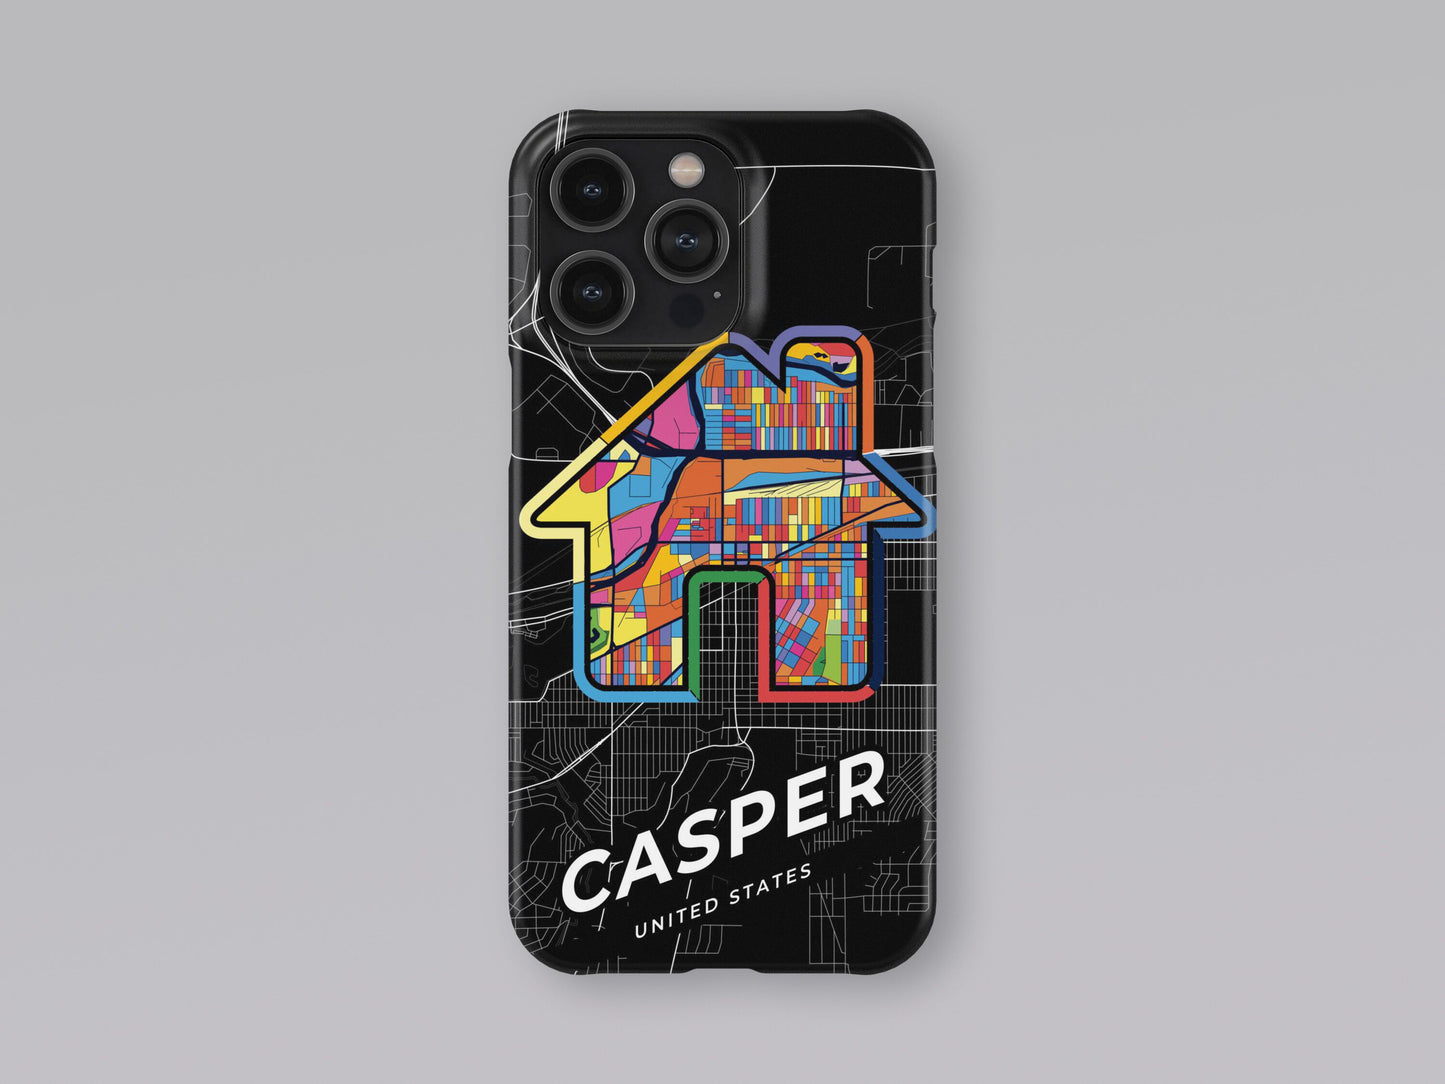 Casper Wyoming slim phone case with colorful icon. Birthday, wedding or housewarming gift. Couple match cases. 3